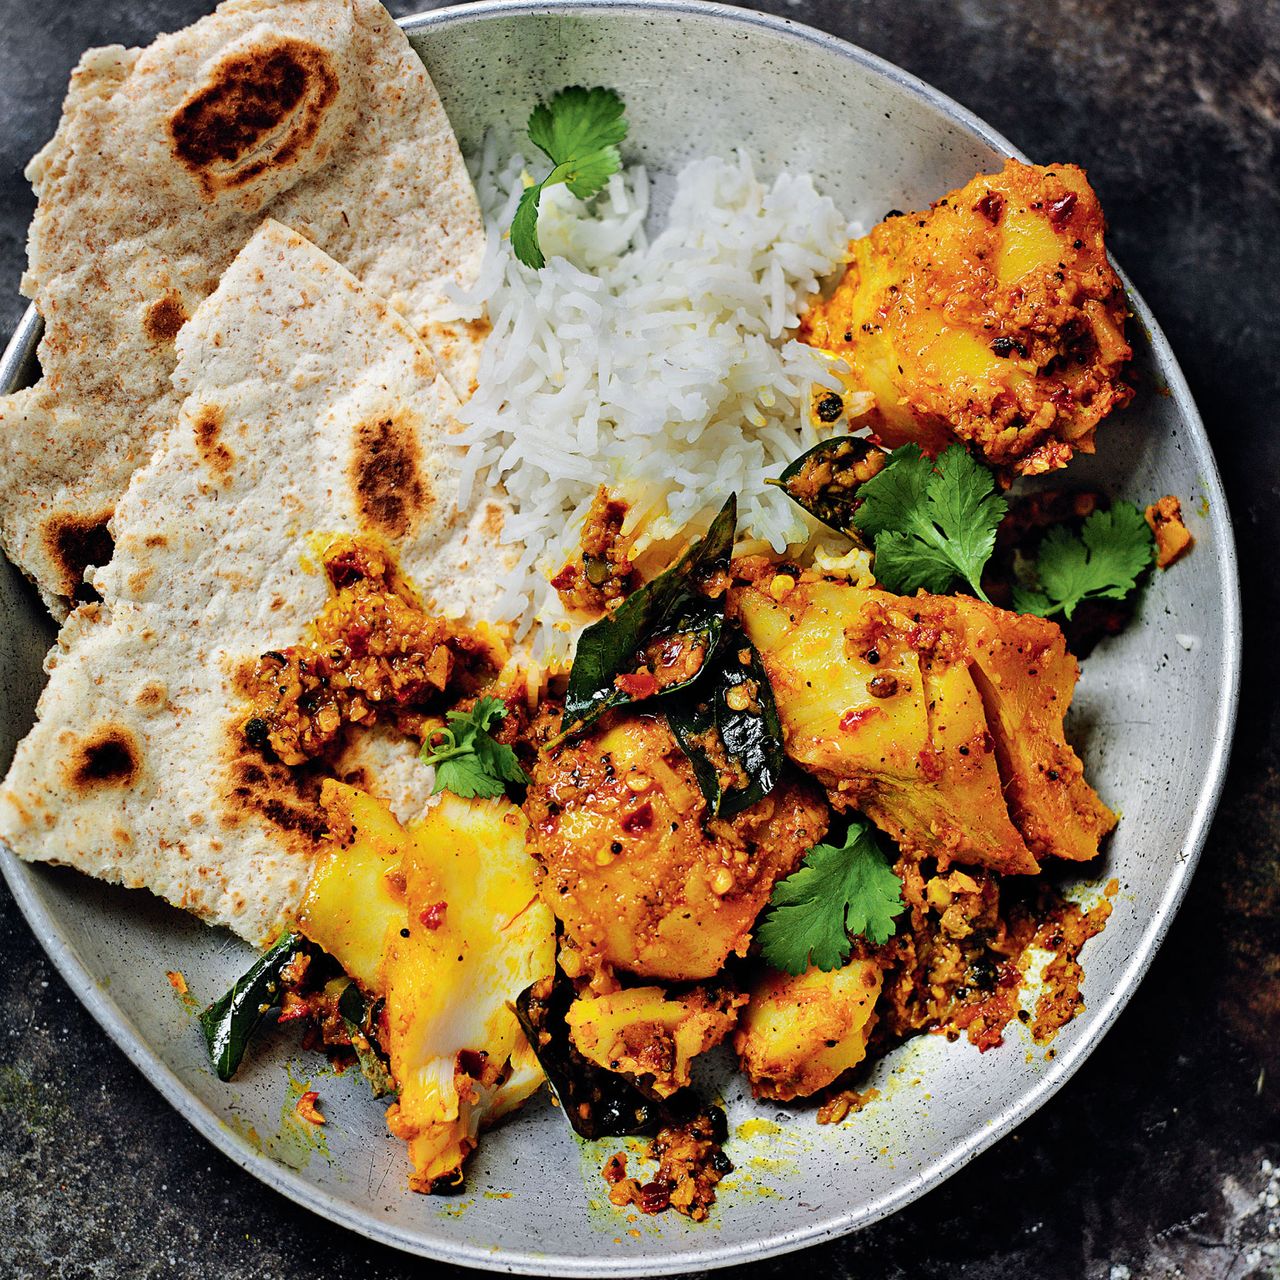 Rick Stein's India Recipes | Woman & Home